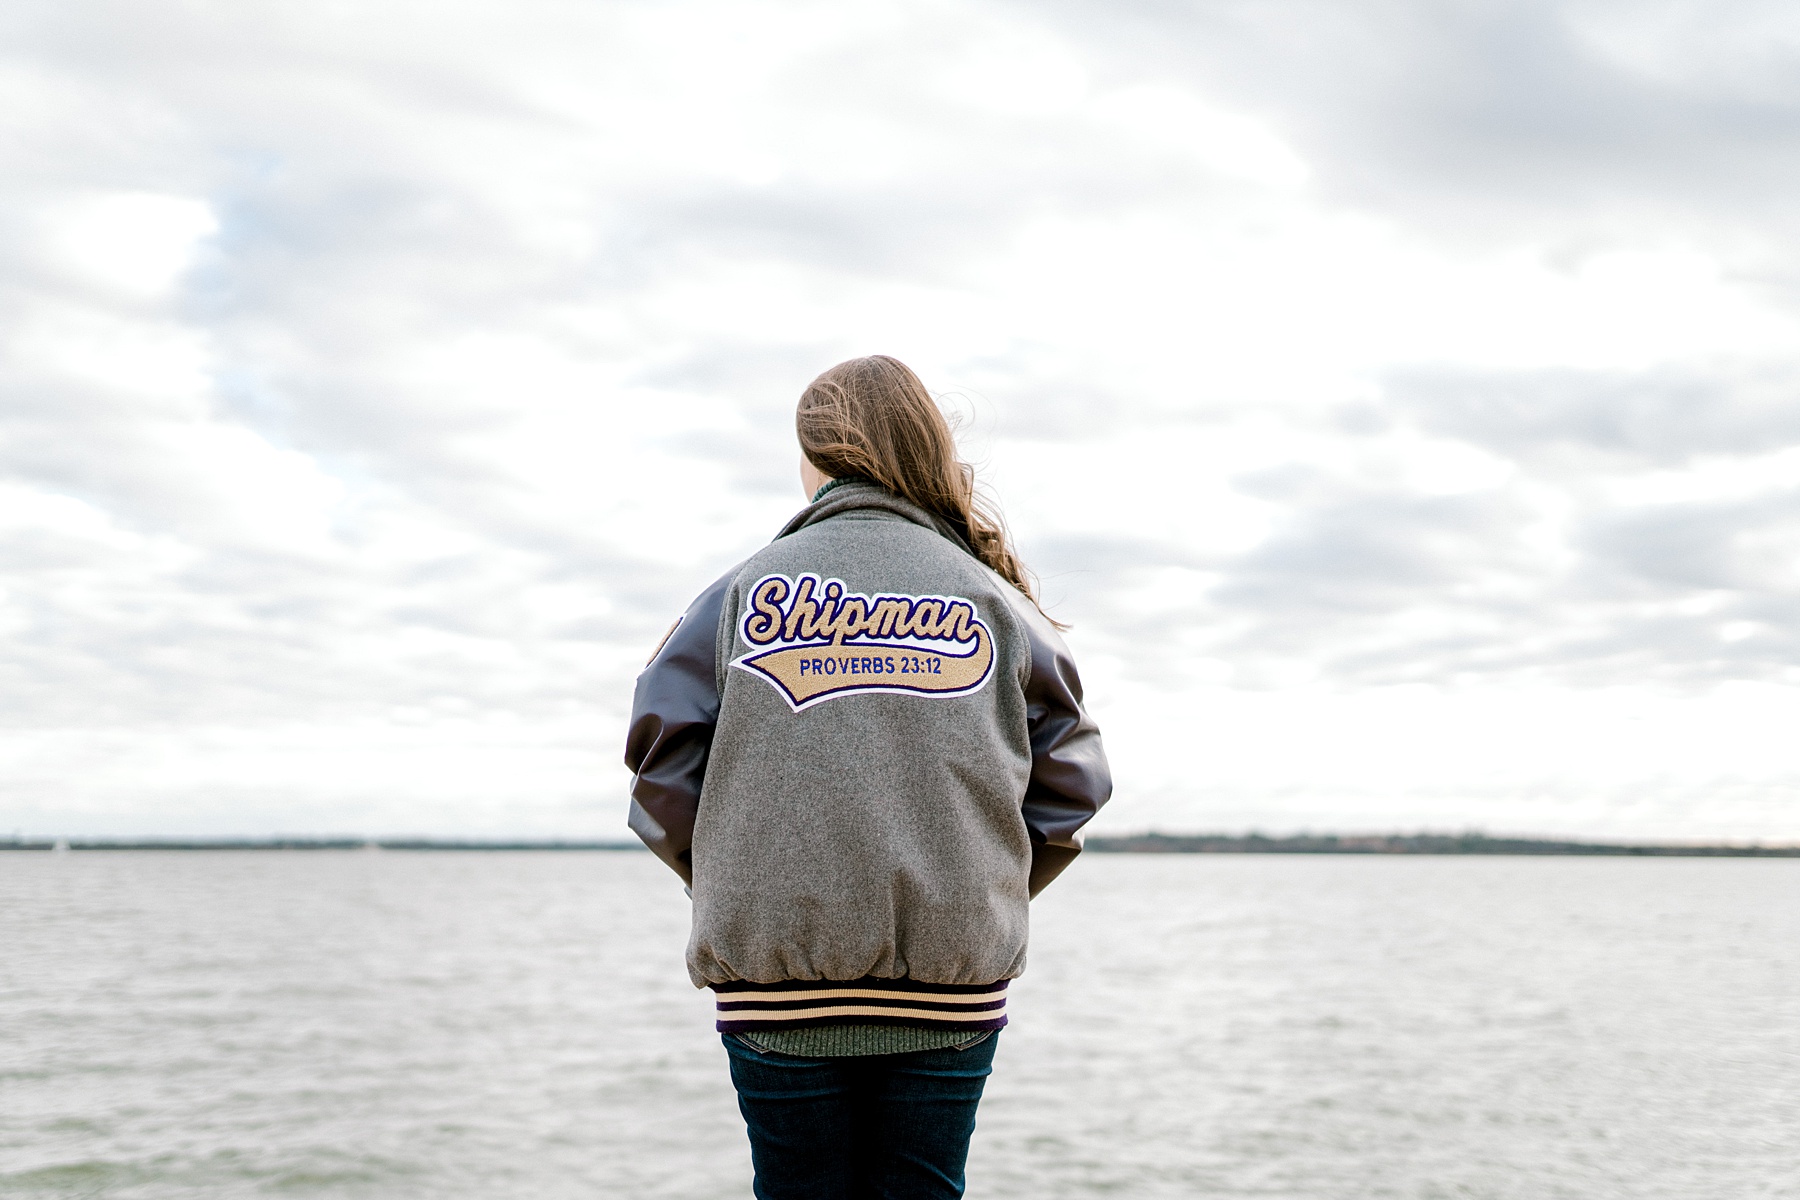 senior girl in letterman jacket with proverbs 23:12 on back